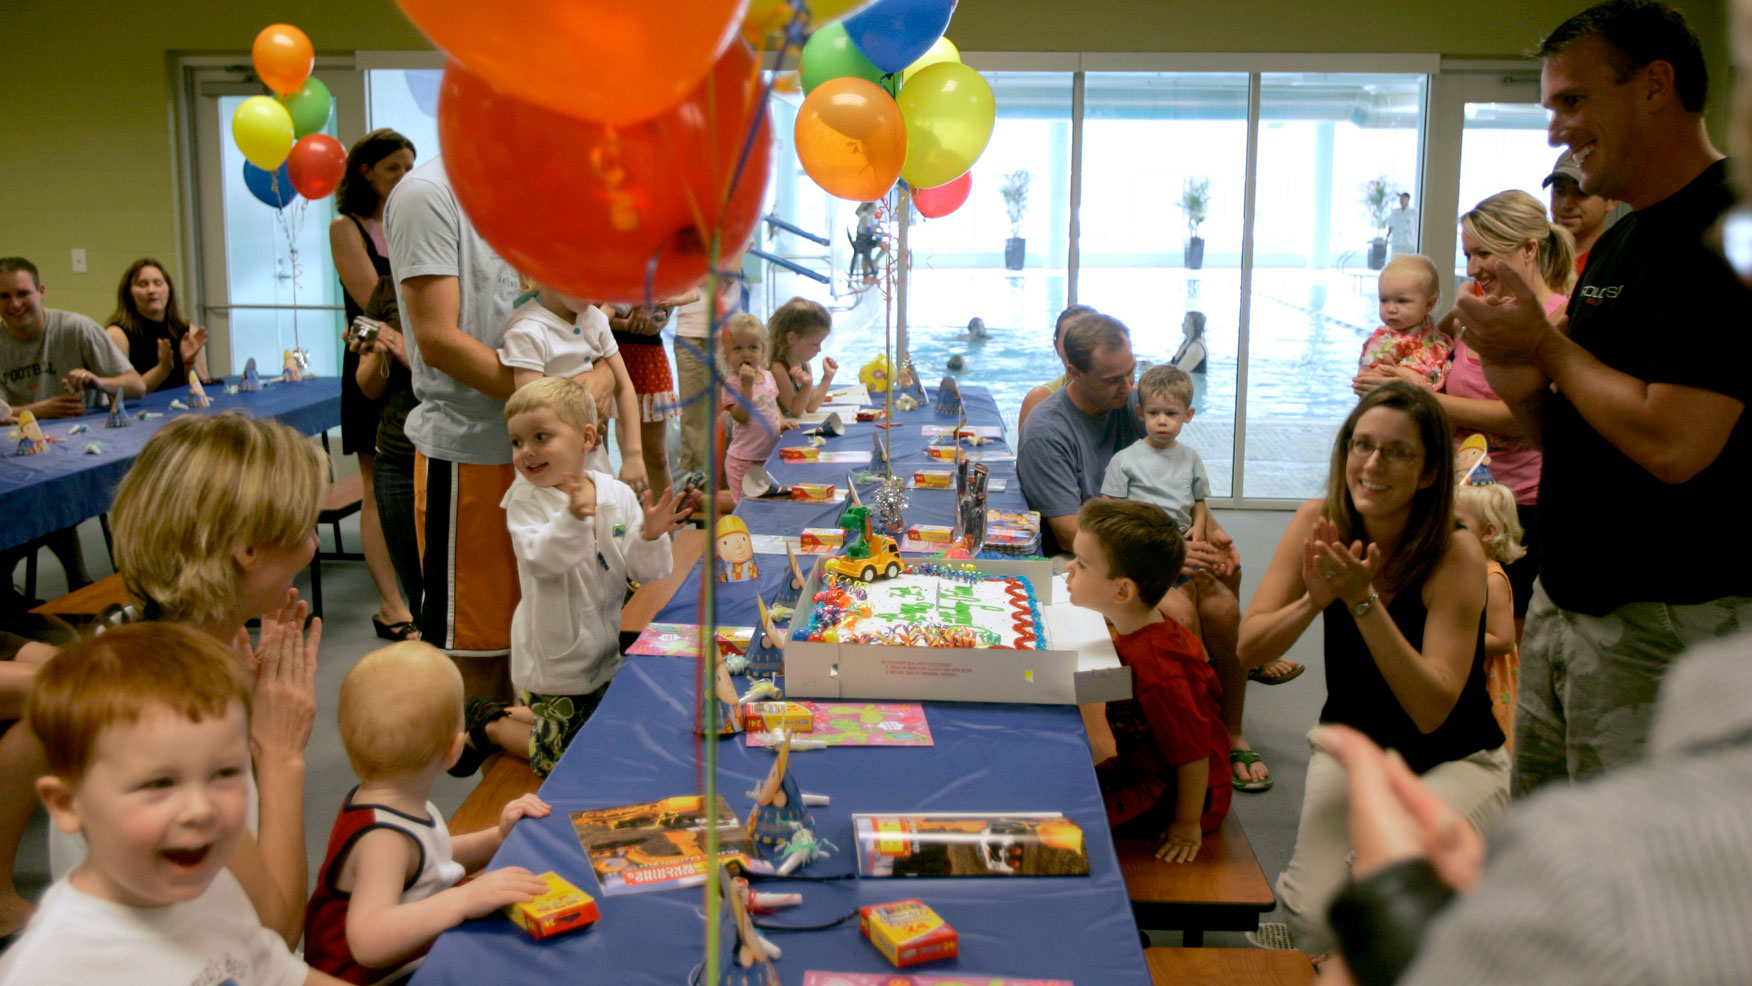 children and parents clap and smile during birthday party in party room next to pool with balloons